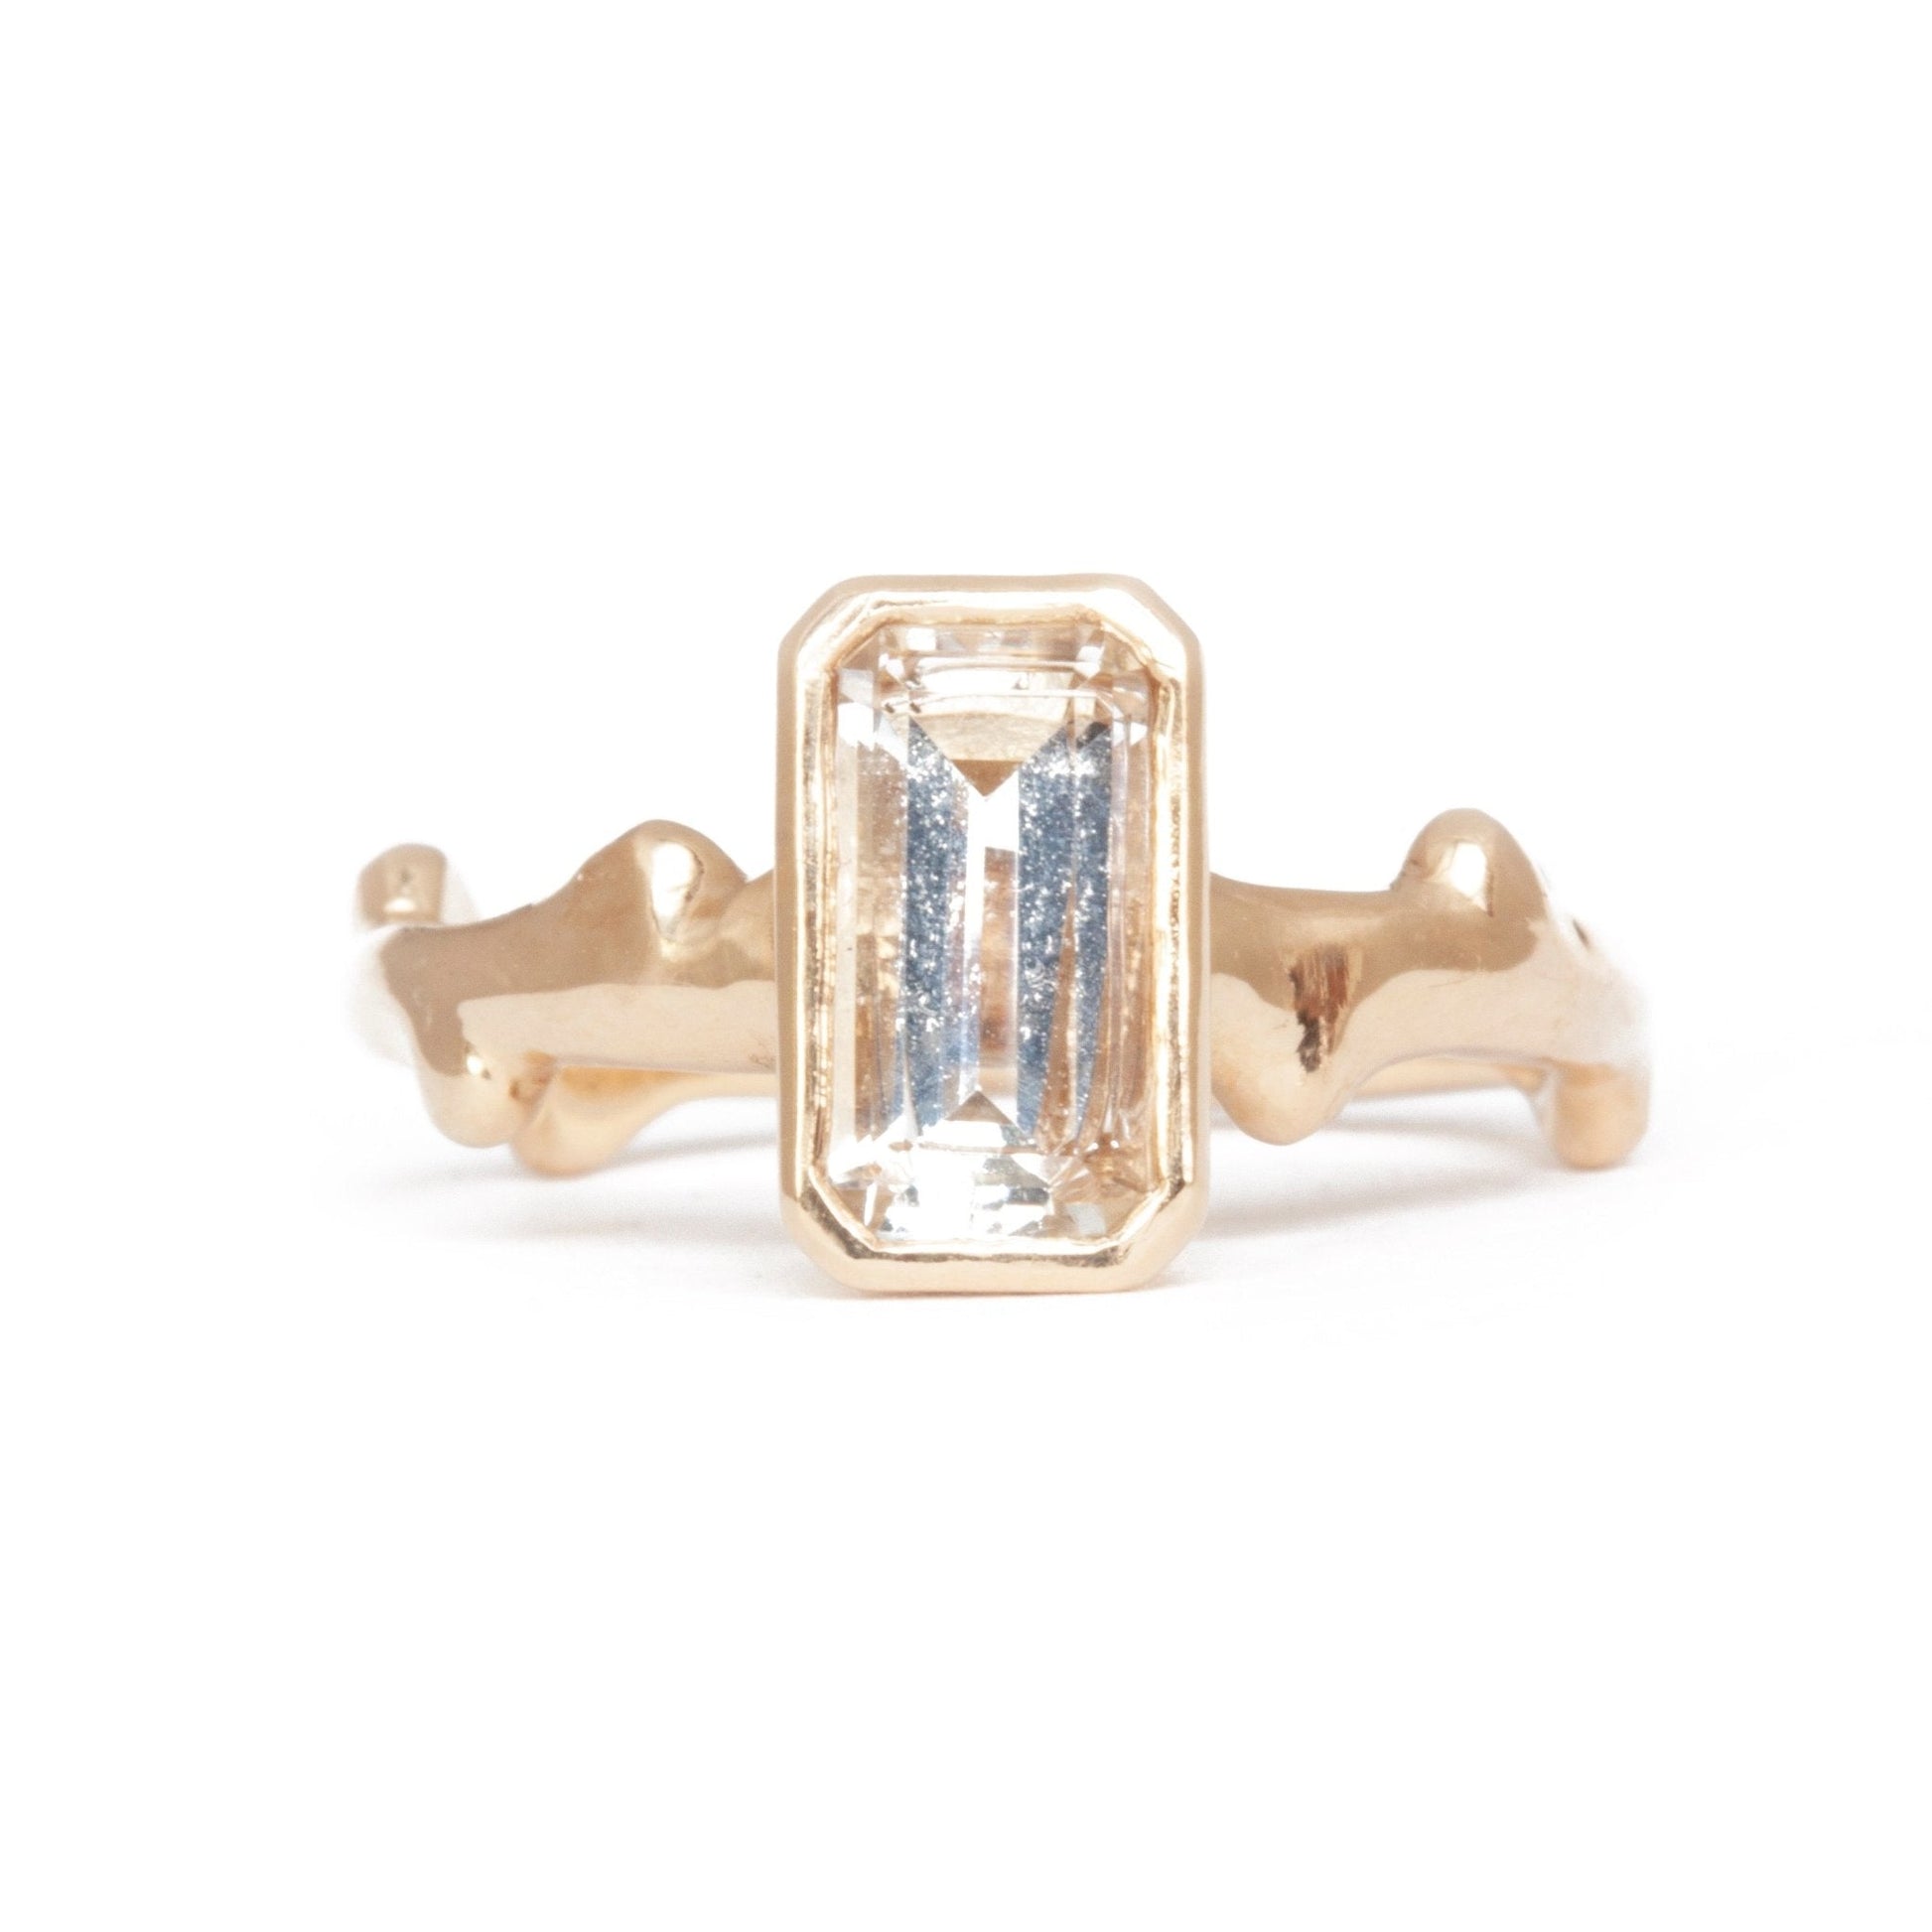 The Fairmined New Hampshire Goshenite Emerald-Cut Notched Solitaire - W.R. Metalarts